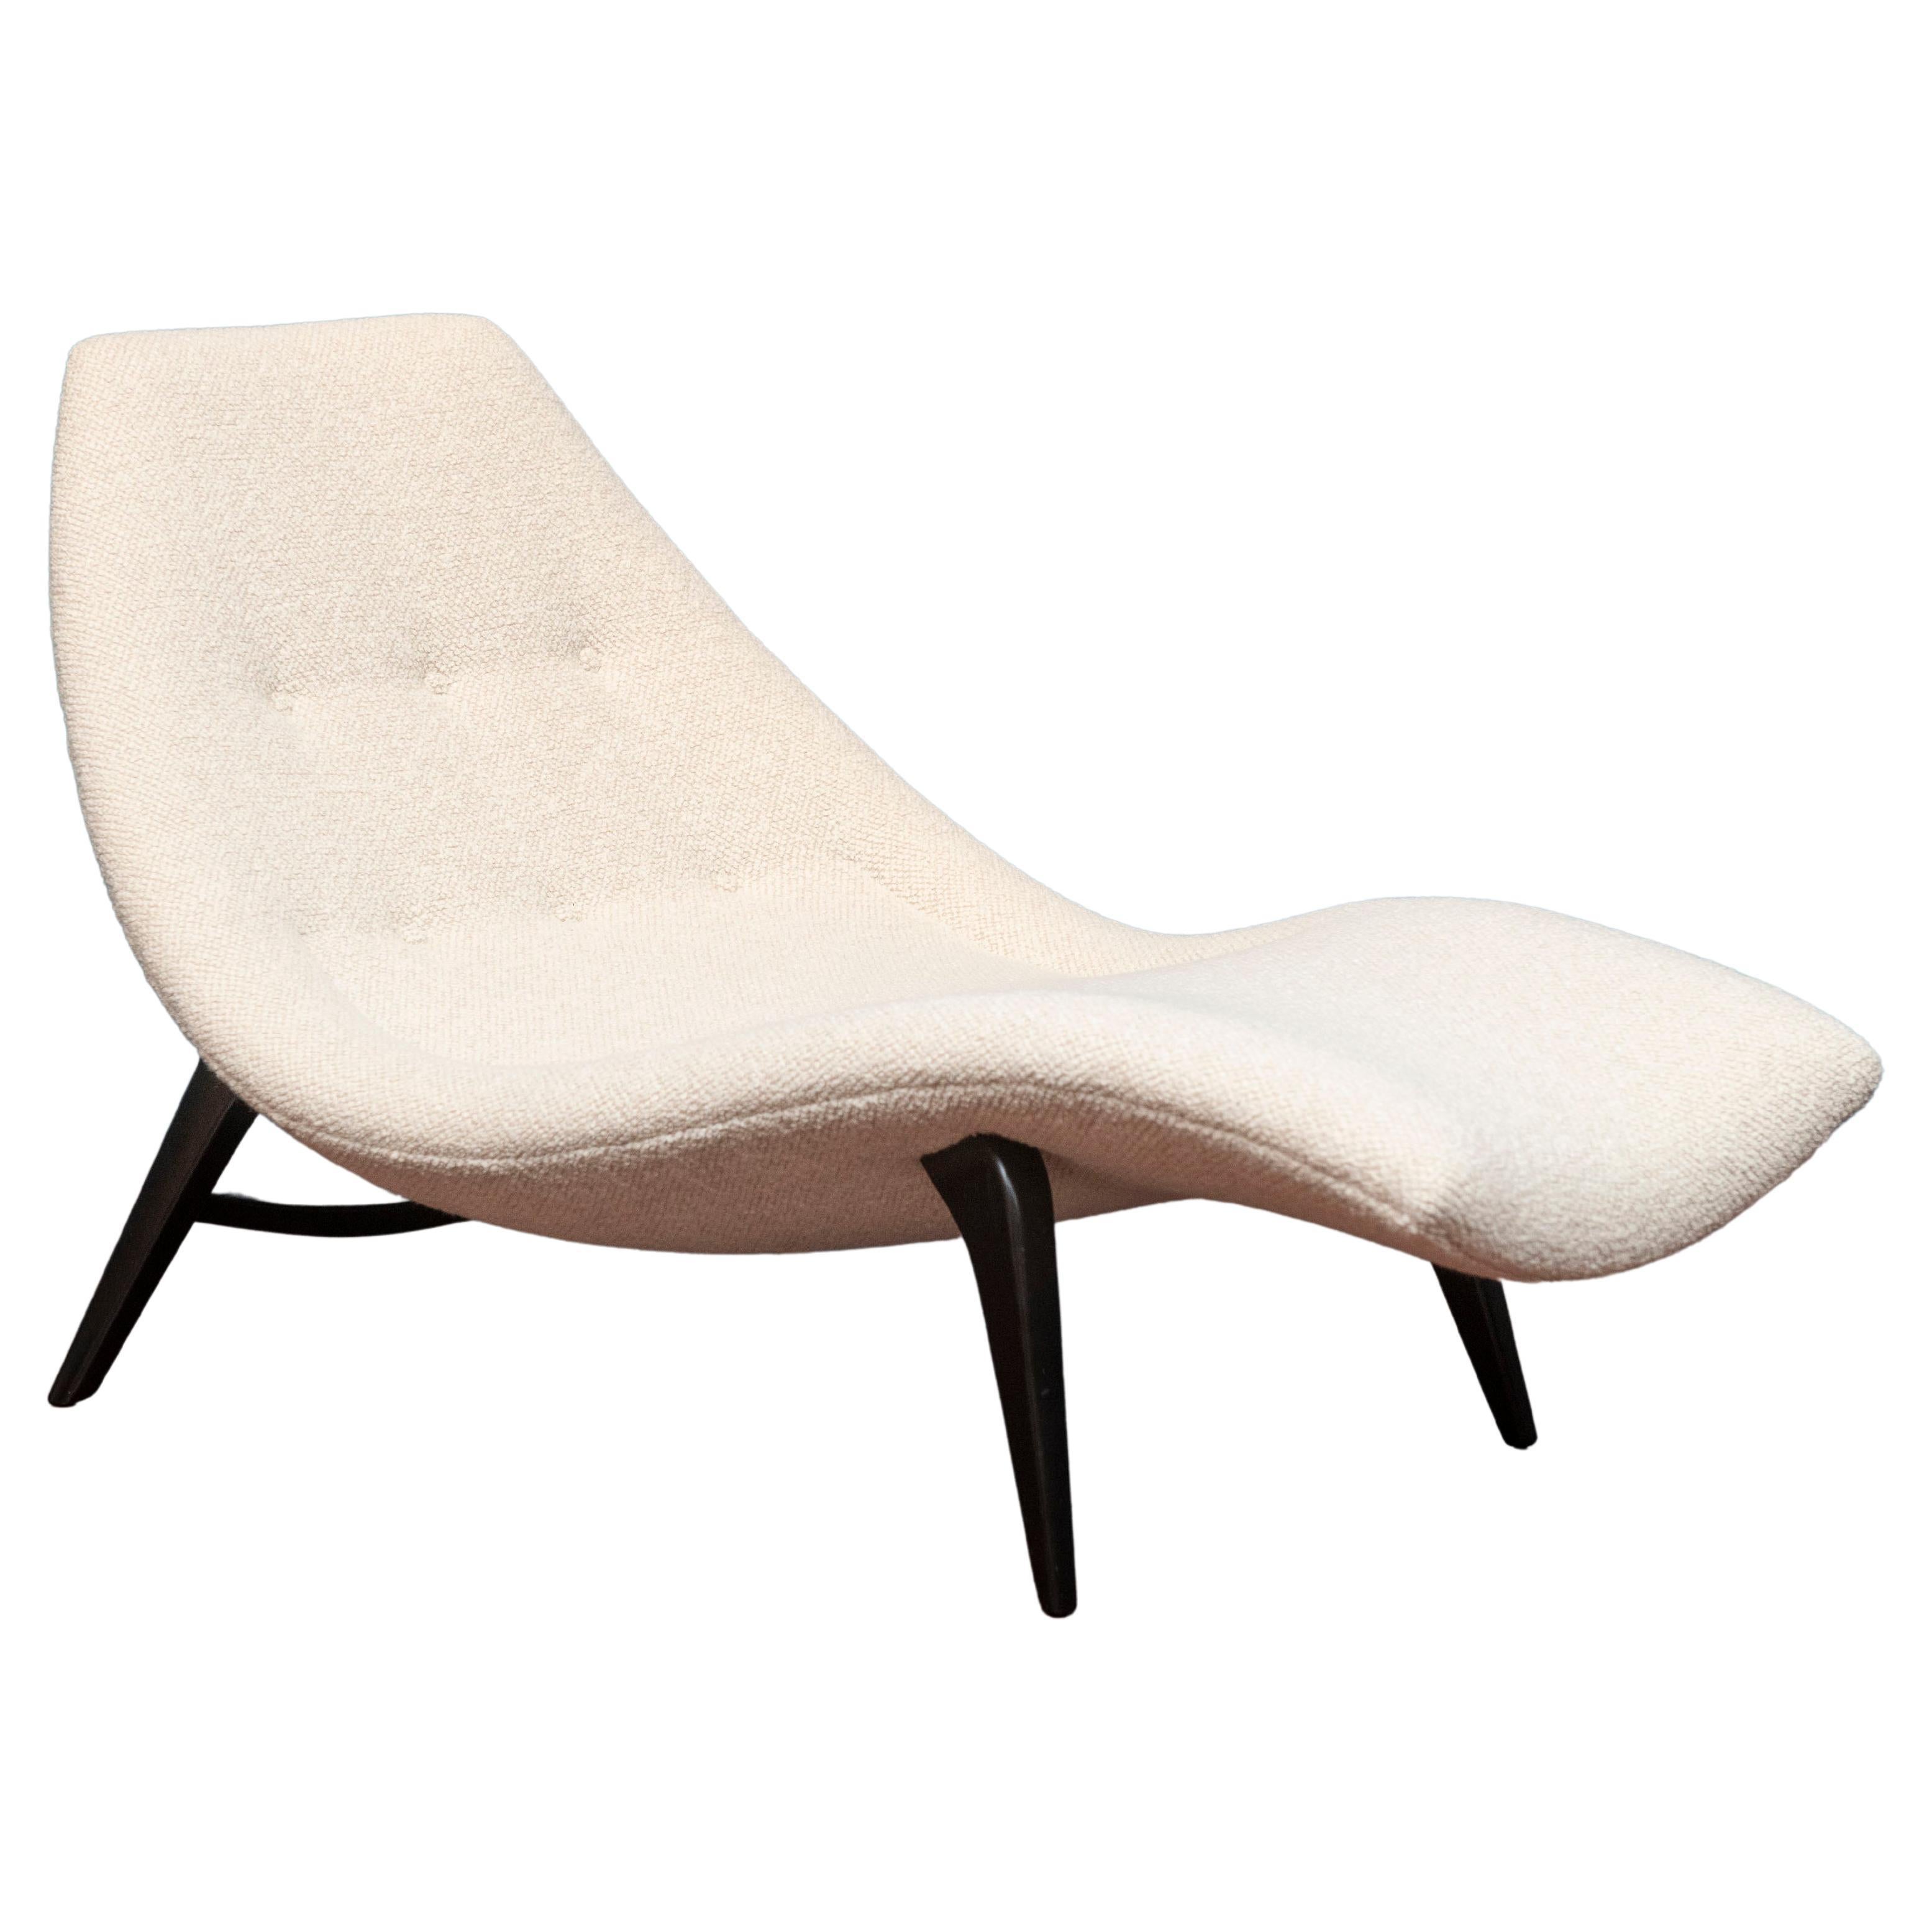 Jack Sherman Chaise Lounge for Chaircraft of California For Sale